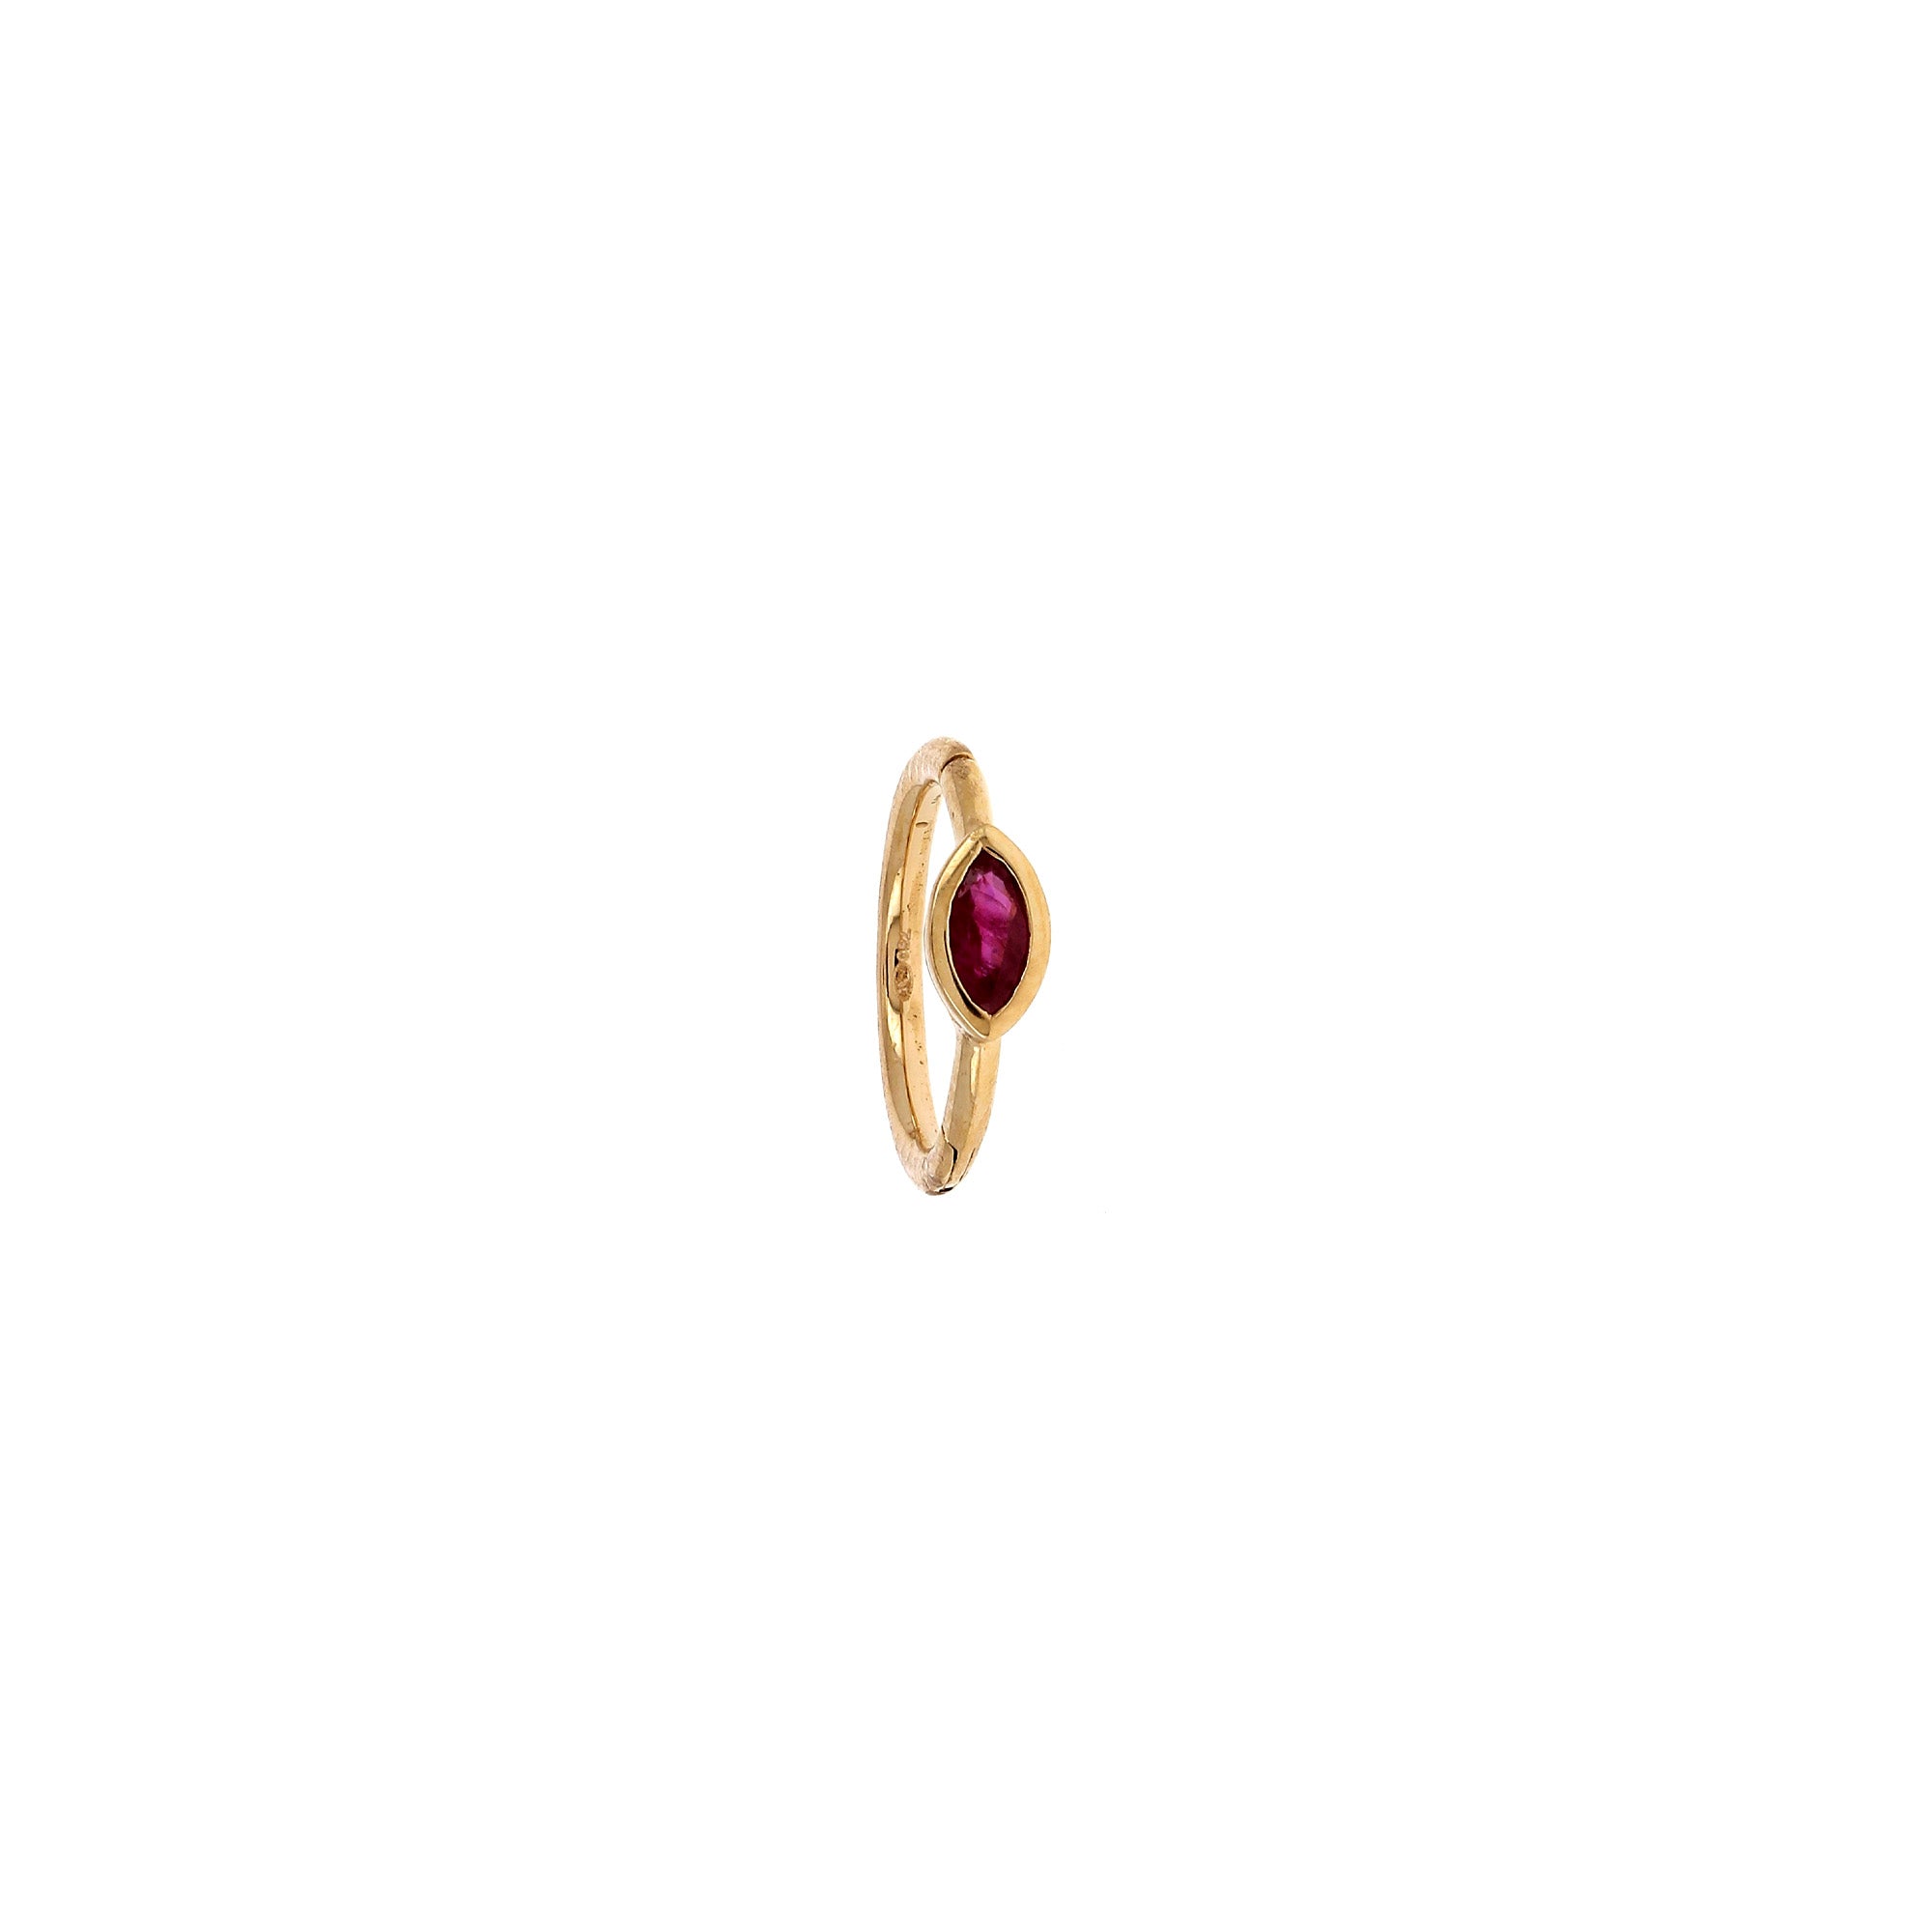 Créole 8mm Rubis Marquise 3x2mm Or Rose